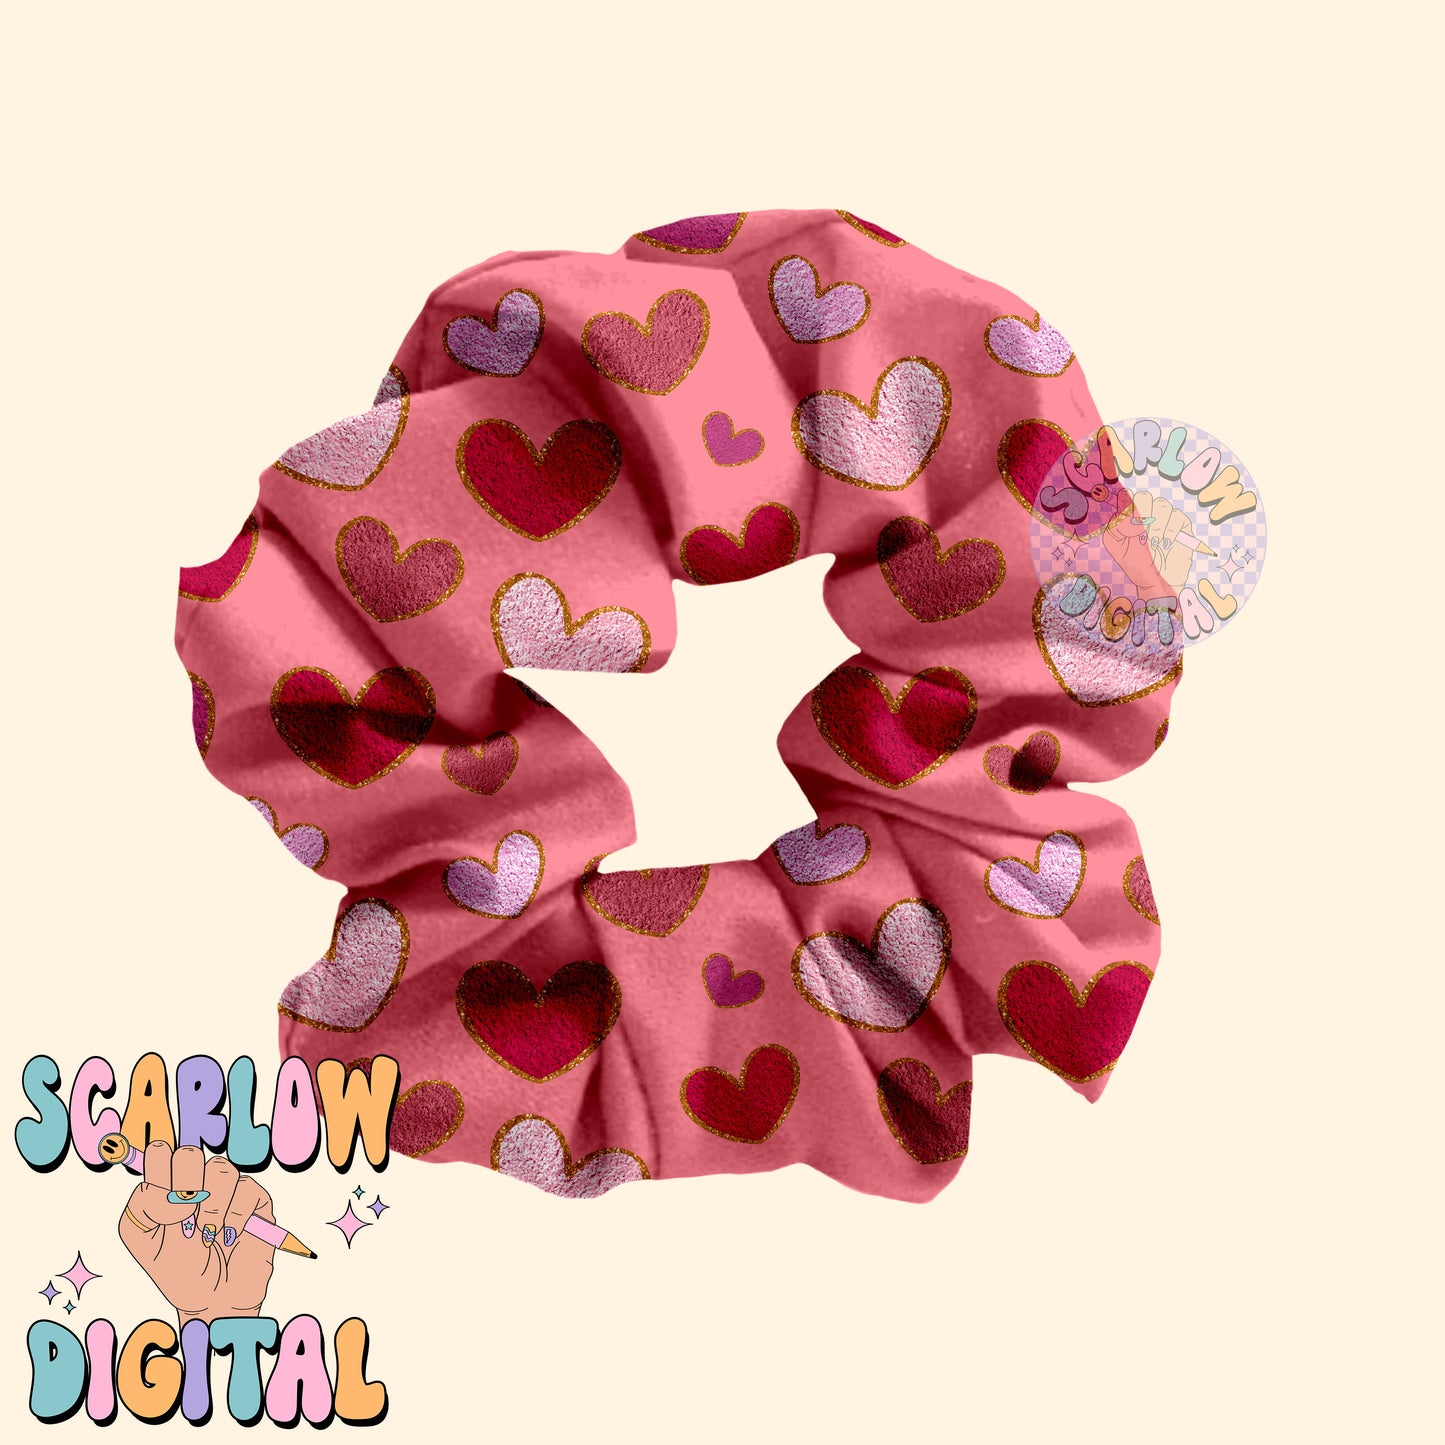 Faux Chenille Hearts Seamless Pattern-Valentine's Day Sublimation Digital Design Download-hearts seamless pattern, girly valentines seamless